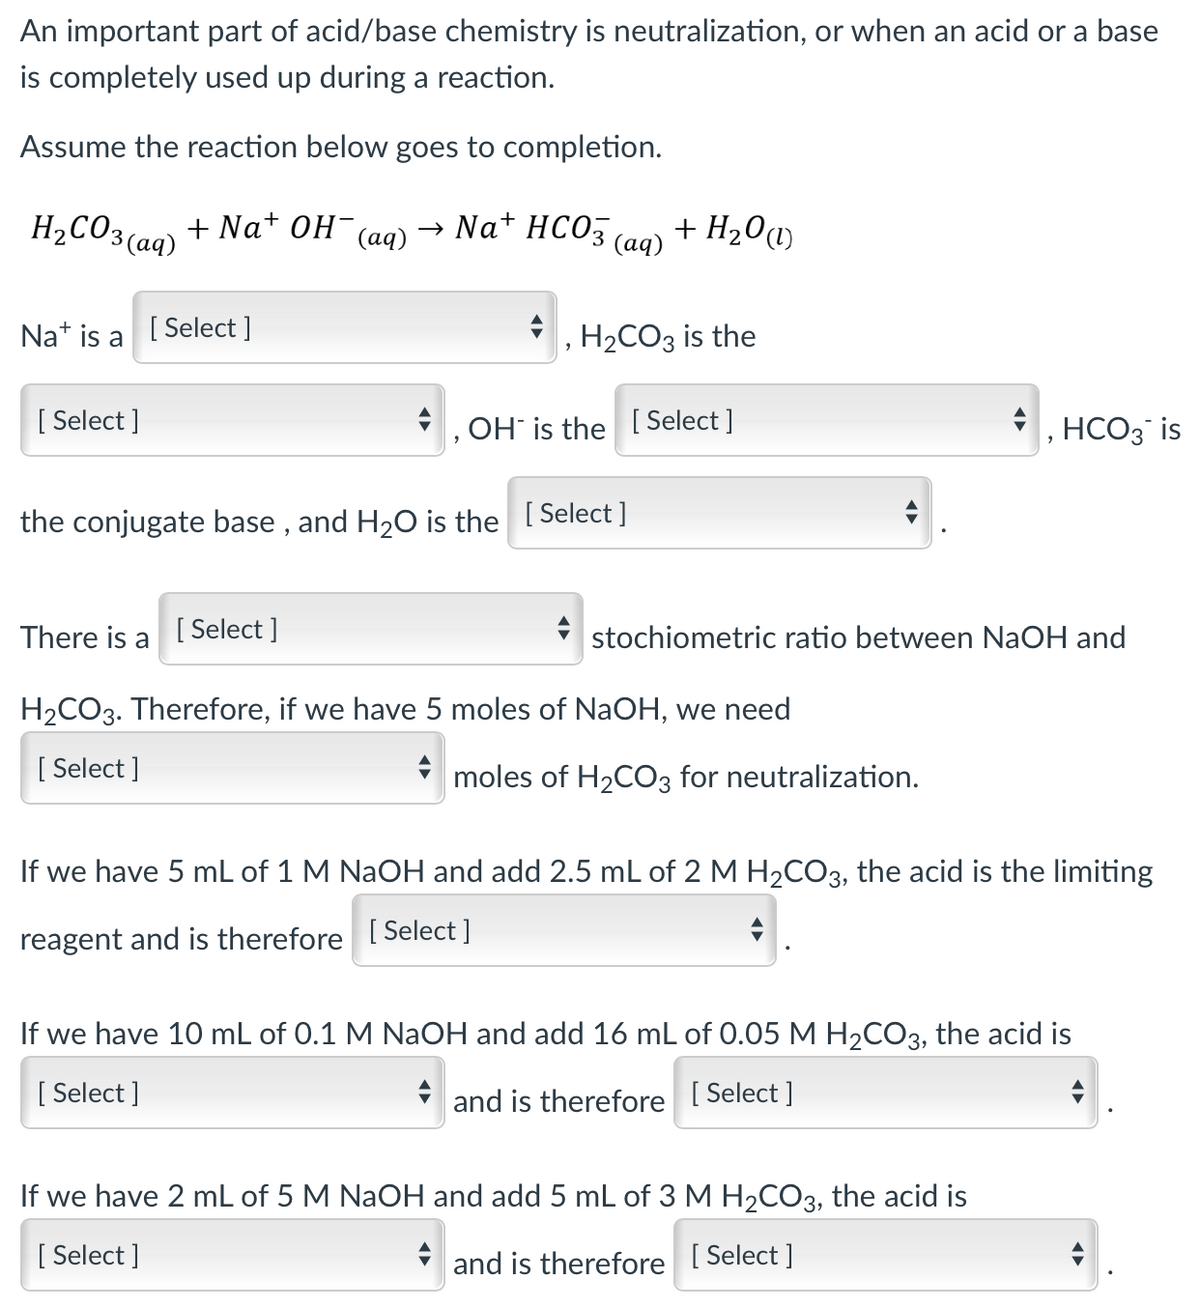 An important part of acid/base chemistry is neutralization, or when an acid or a base
is completely used up during a reaction.
Assume the reaction below goes to completion.
+Na+ OH(aq)
H₂CO3(aq)
Nat is a [Select]
[Select]
→ Na+ HCO3(aq) + H₂0 (1)
H₂CO3 is the
OH is the [Select]
the conjugate base, and H₂O is the [Select]
There is a [Select]
H₂CO3. Therefore, if we have 5 moles of NaOH, we need
[Select]
stochiometric ratio between NaOH and
moles of H₂CO3 for neutralization.
HCO3 is
If we have 5 mL of 1 M NaOH and add 2.5 mL of 2 M H₂CO3, the acid is the limiting
reagent and is therefore [Select ]
If we have 10 mL of 0.1 M NaOH and add 16 mL of 0.05 M H₂CO3, the acid is
[Select]
and is therefore [Select]
If we have 2 mL of 5 M NaOH and add 5 mL of 3 M H₂CO3, the acid is
[ Select ]
and is therefore [Select]